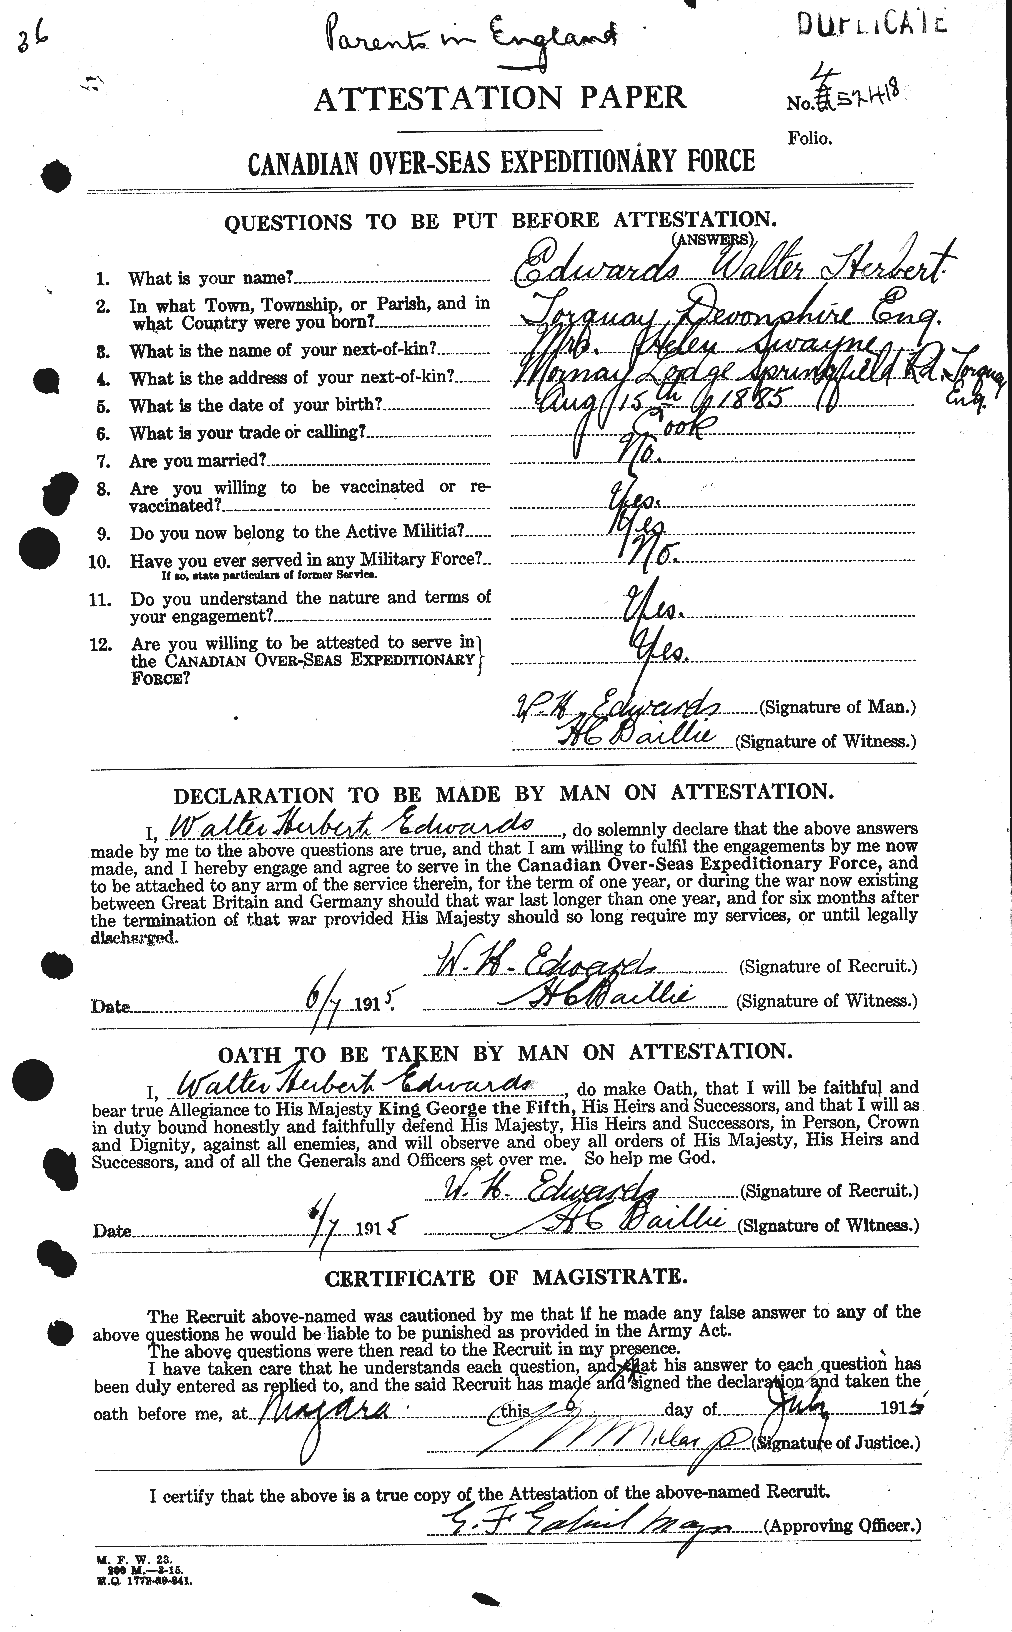 Personnel Records of the First World War - CEF 310373a